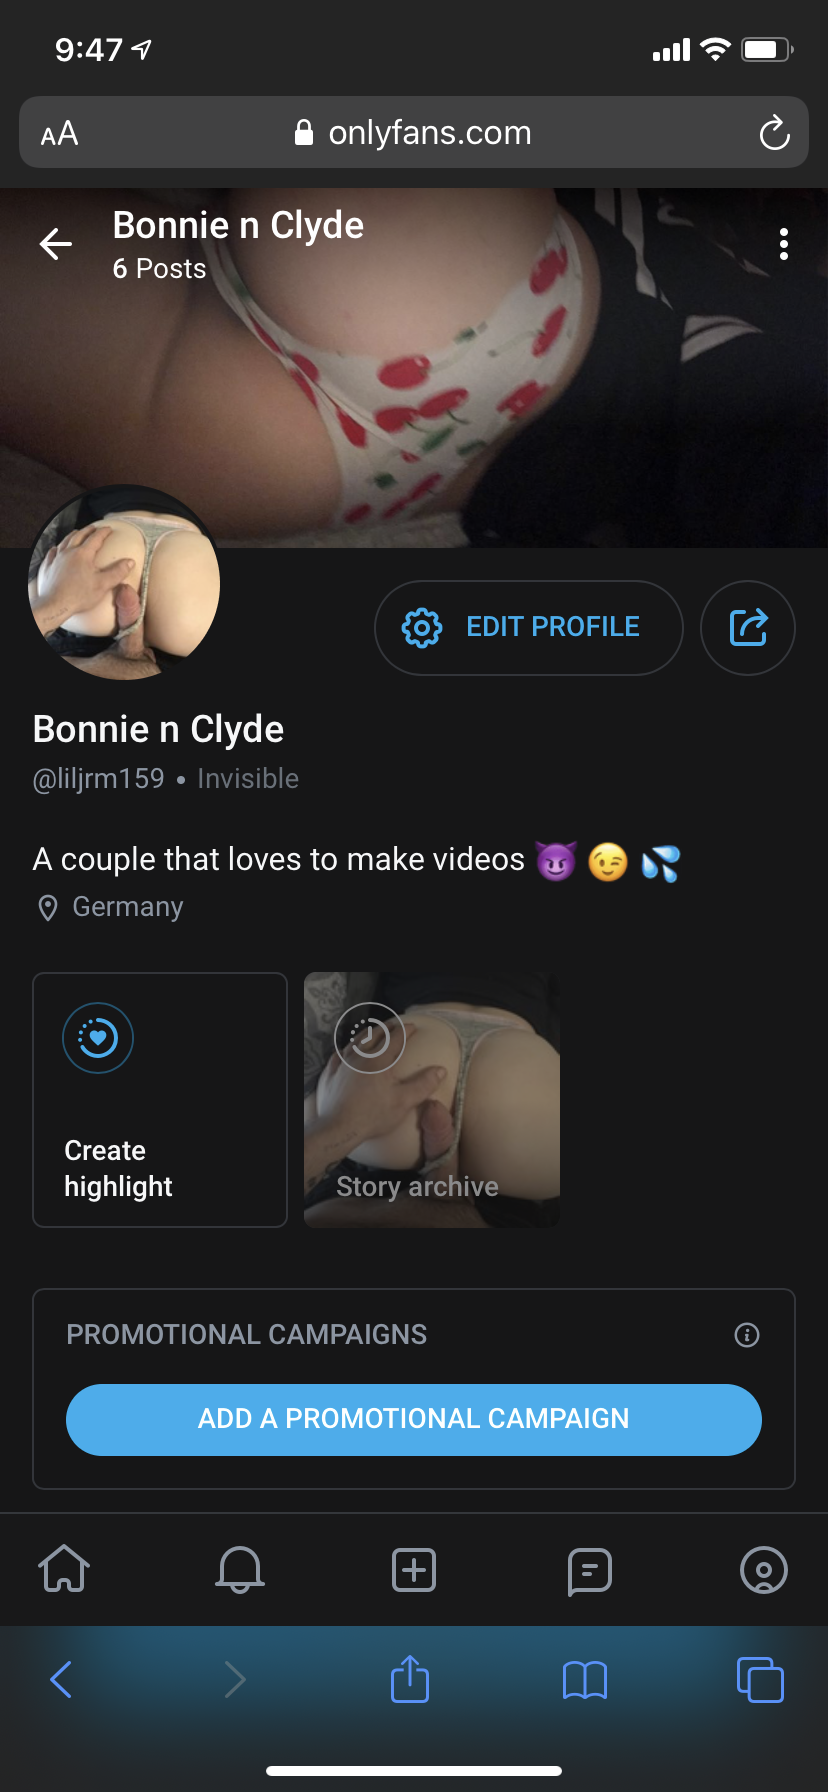 Photo by Bonnie n clyde with the username @liljman58, posted on August 27, 2020. The post is about the topic Looking Up